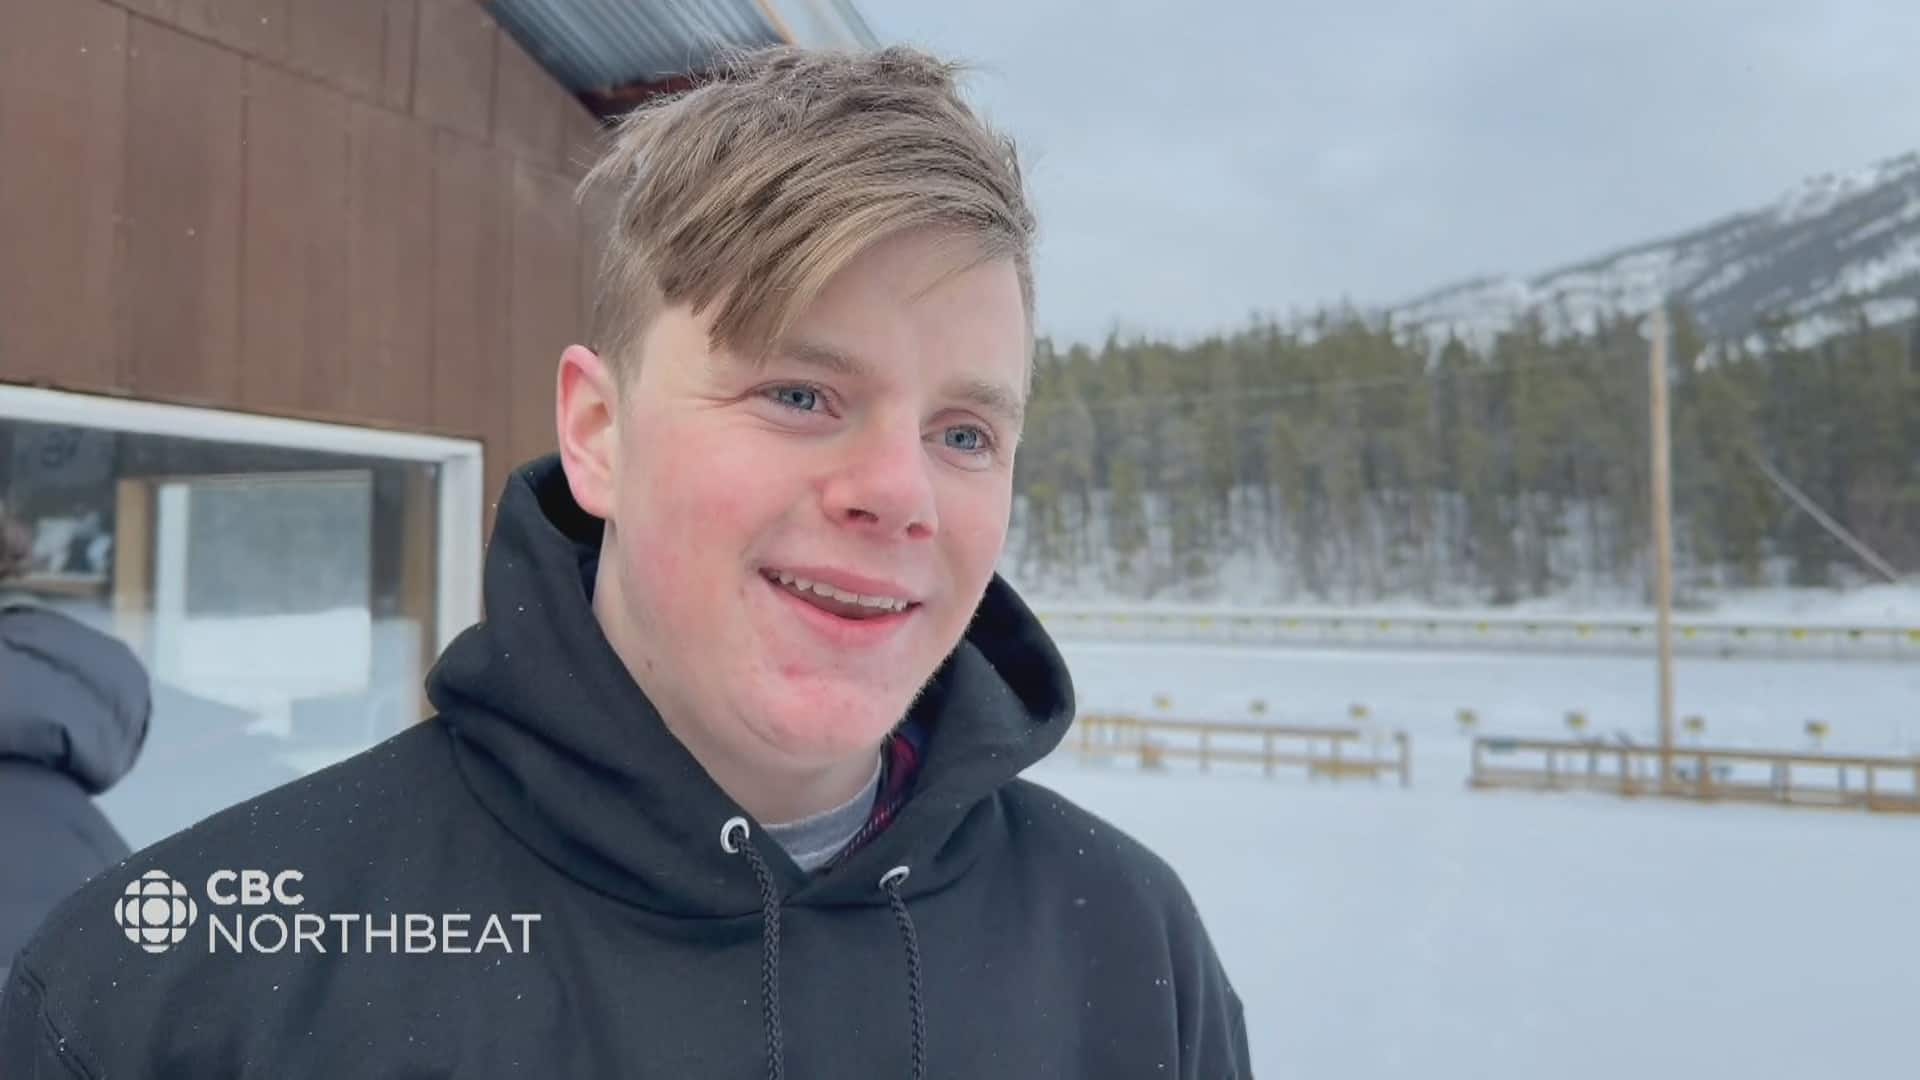 Yukon biathlete gives up Arctic Winter Games spot for friend [Video]